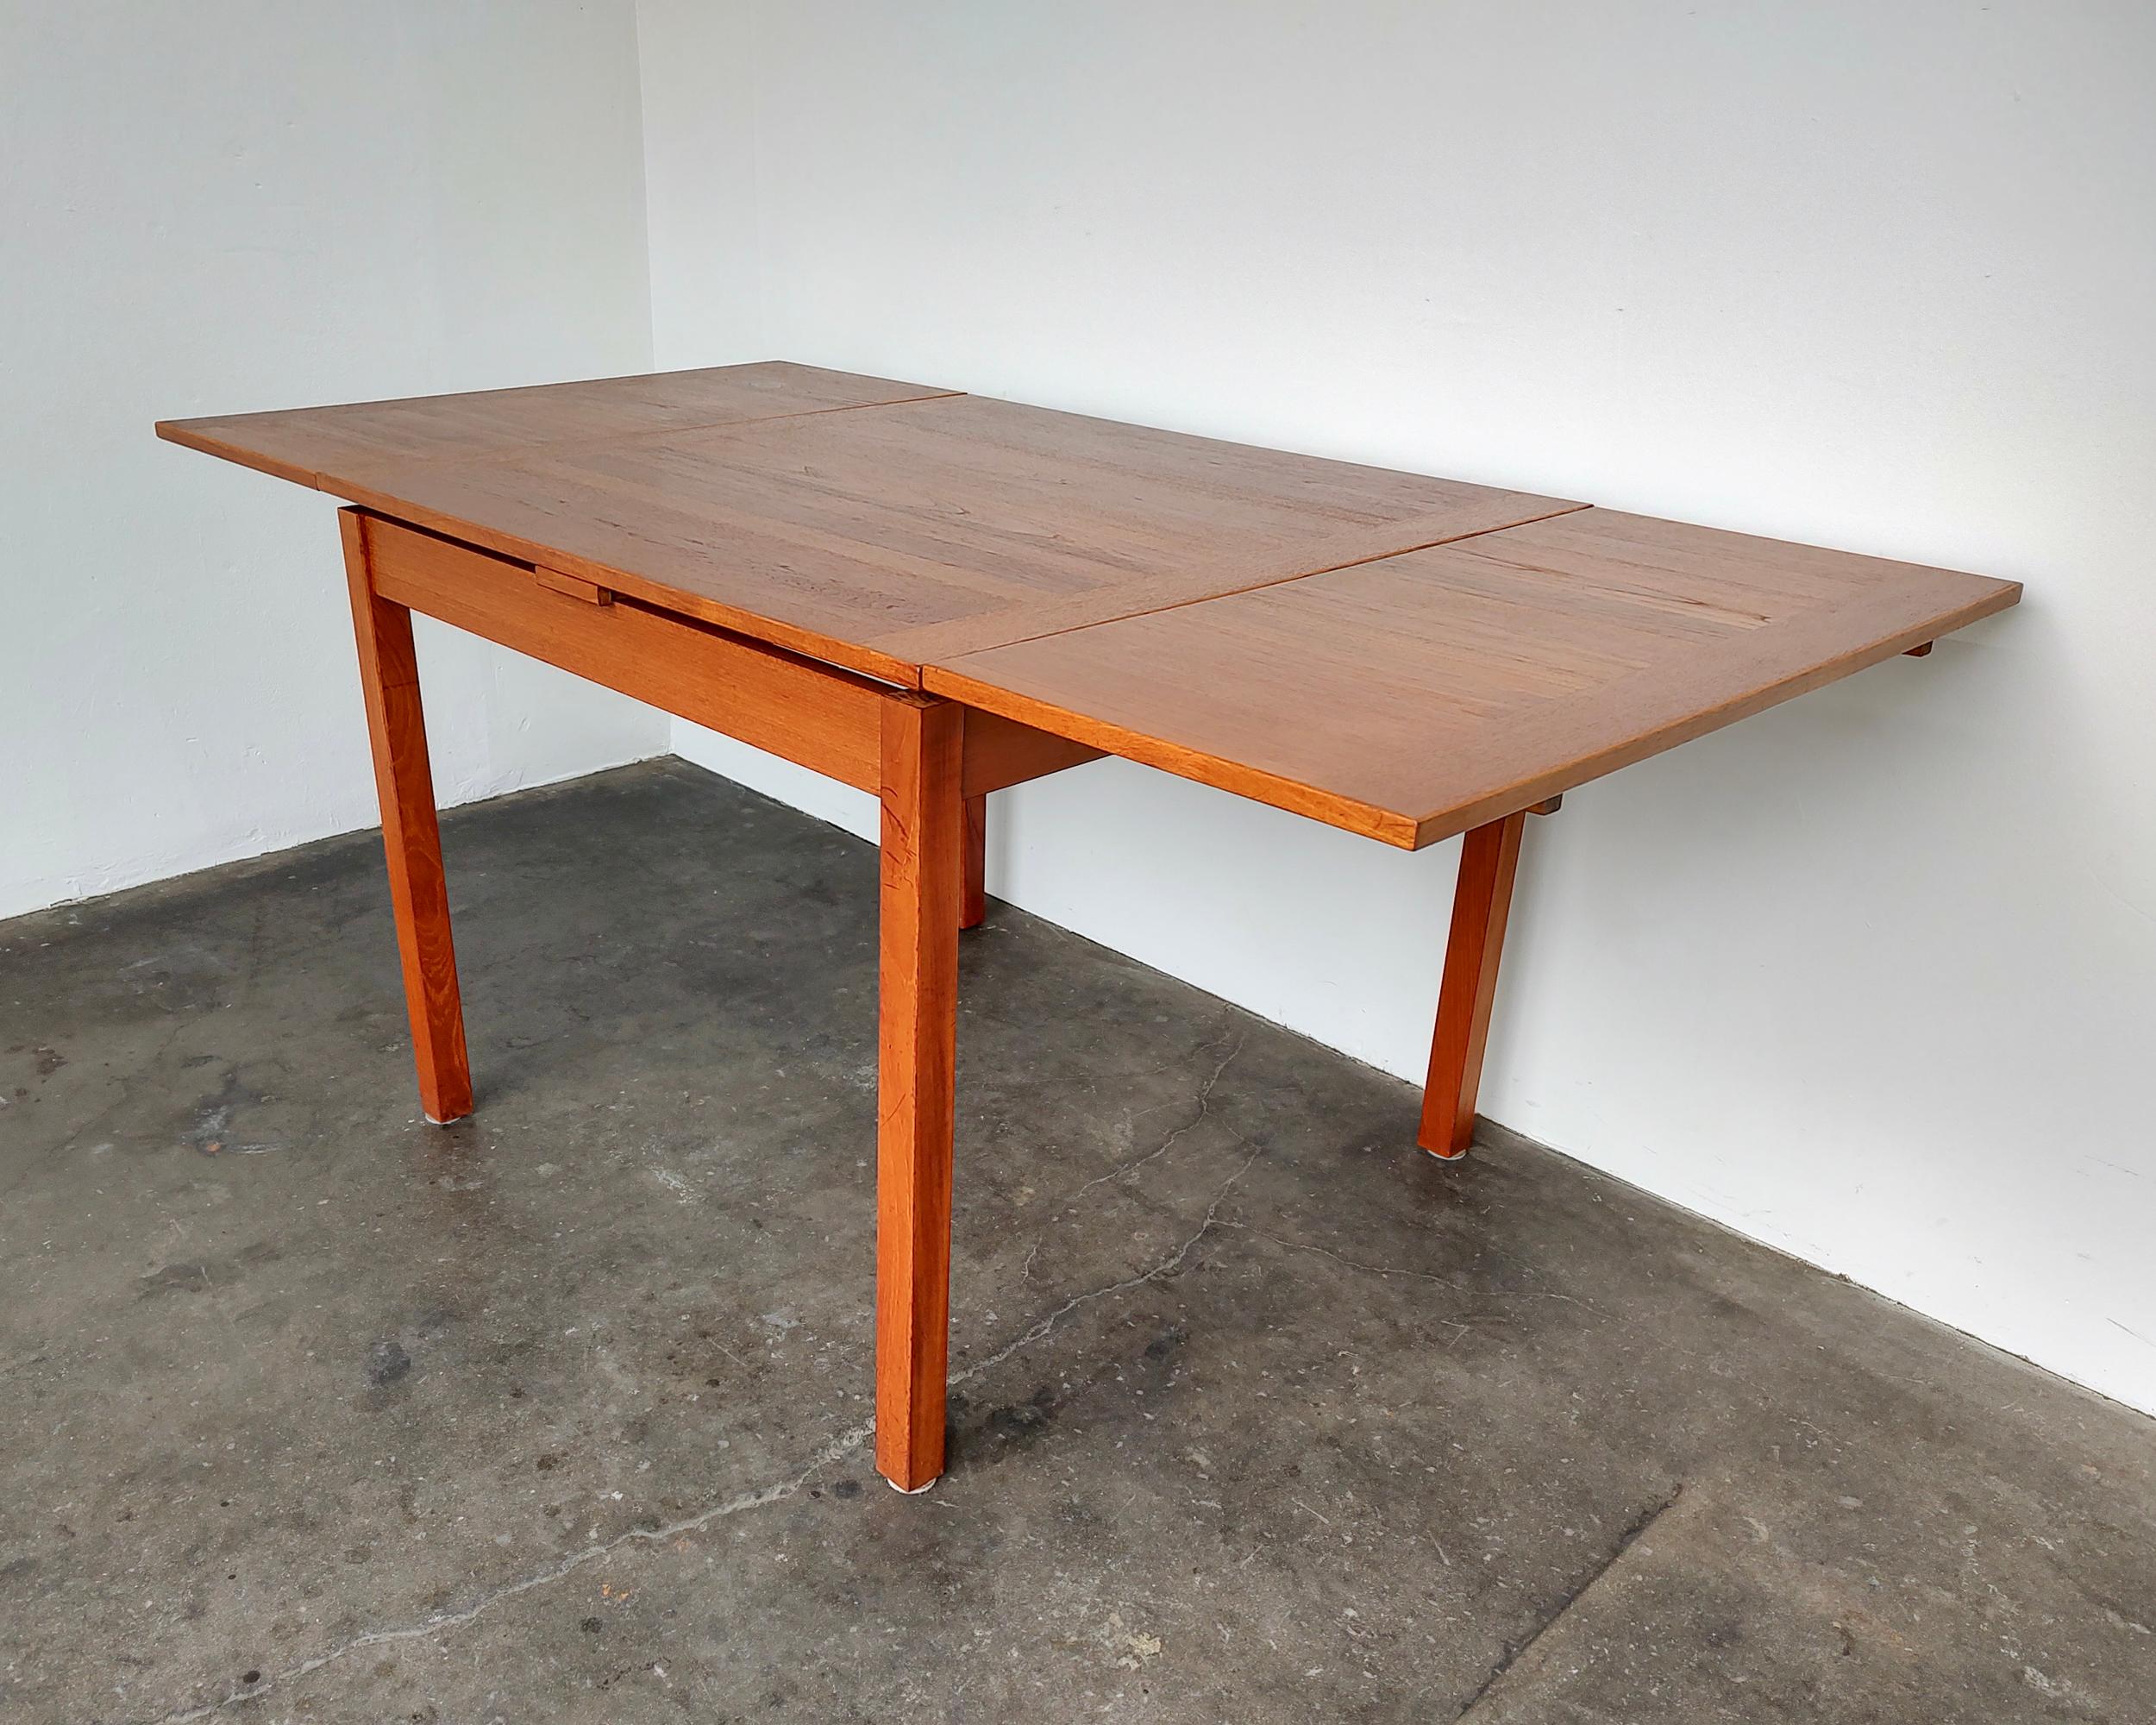 Danish mid-century modern teak wood dining table. Expands from square shape with hidden leaves underneath that slide open to longer rectangular shape. Overall great vintage condition, some light wear on legs. Legs can be detached for easy